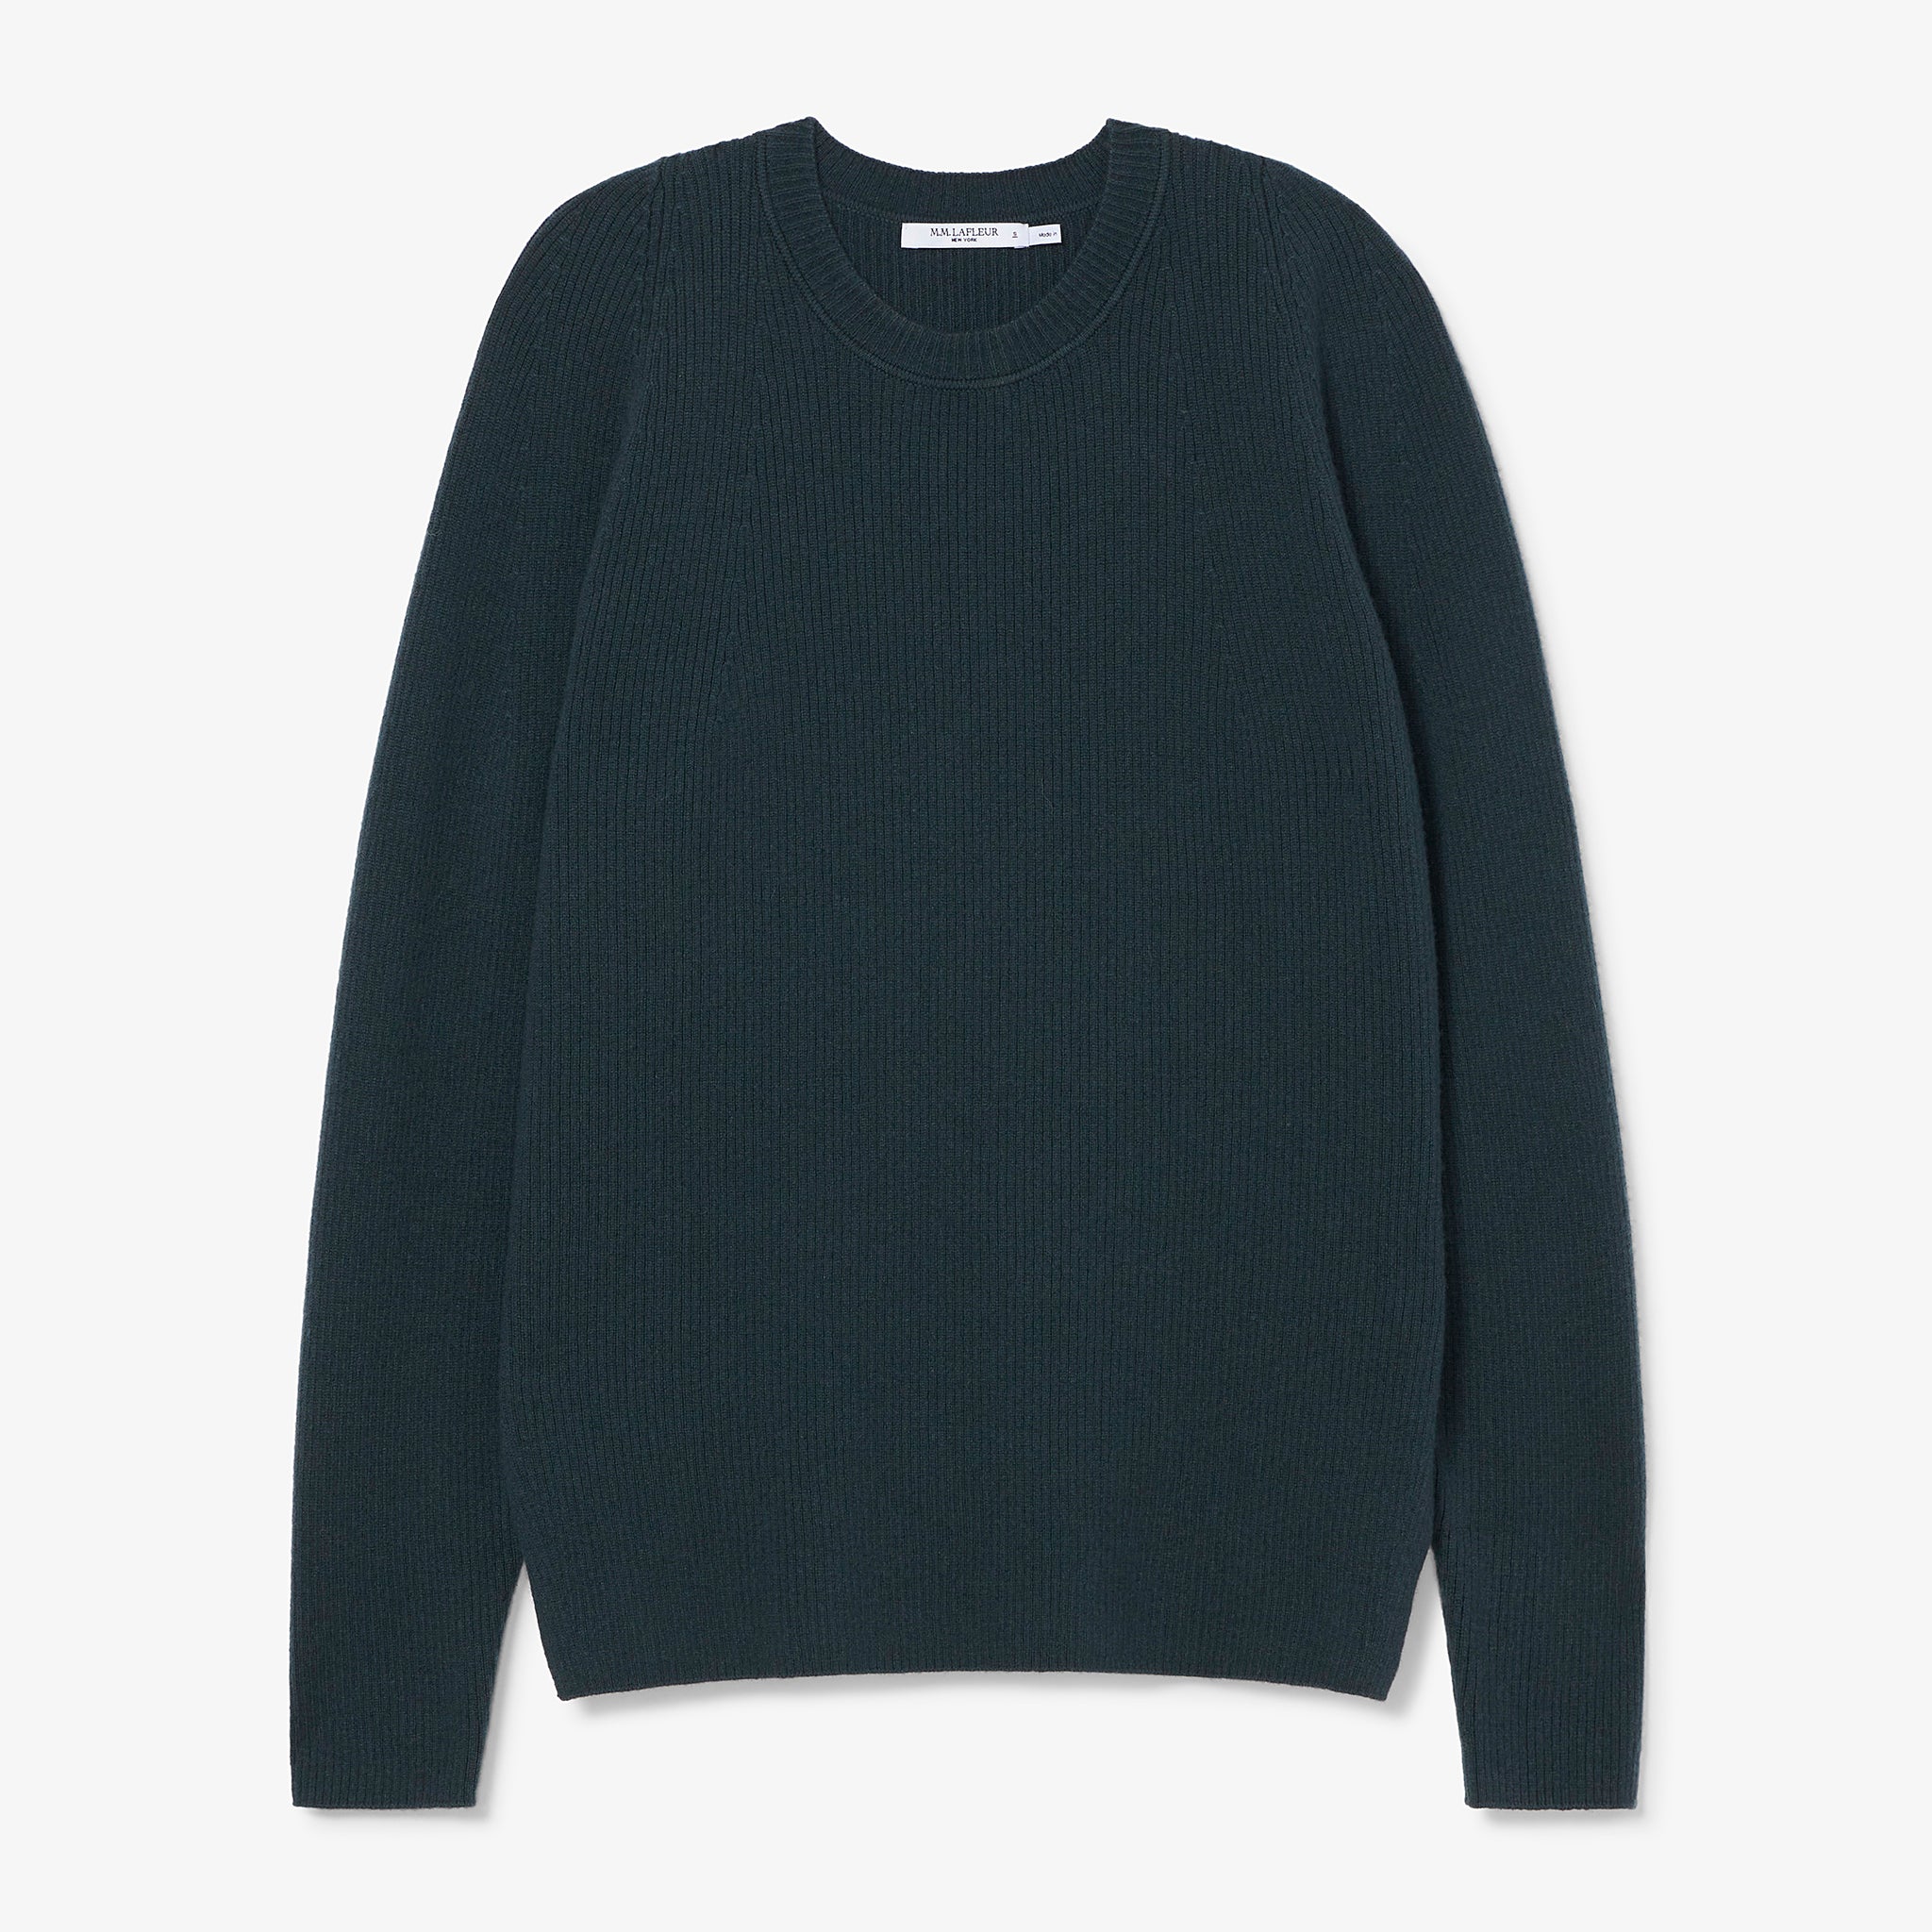 Packshot image of the ollie sweater in malachite